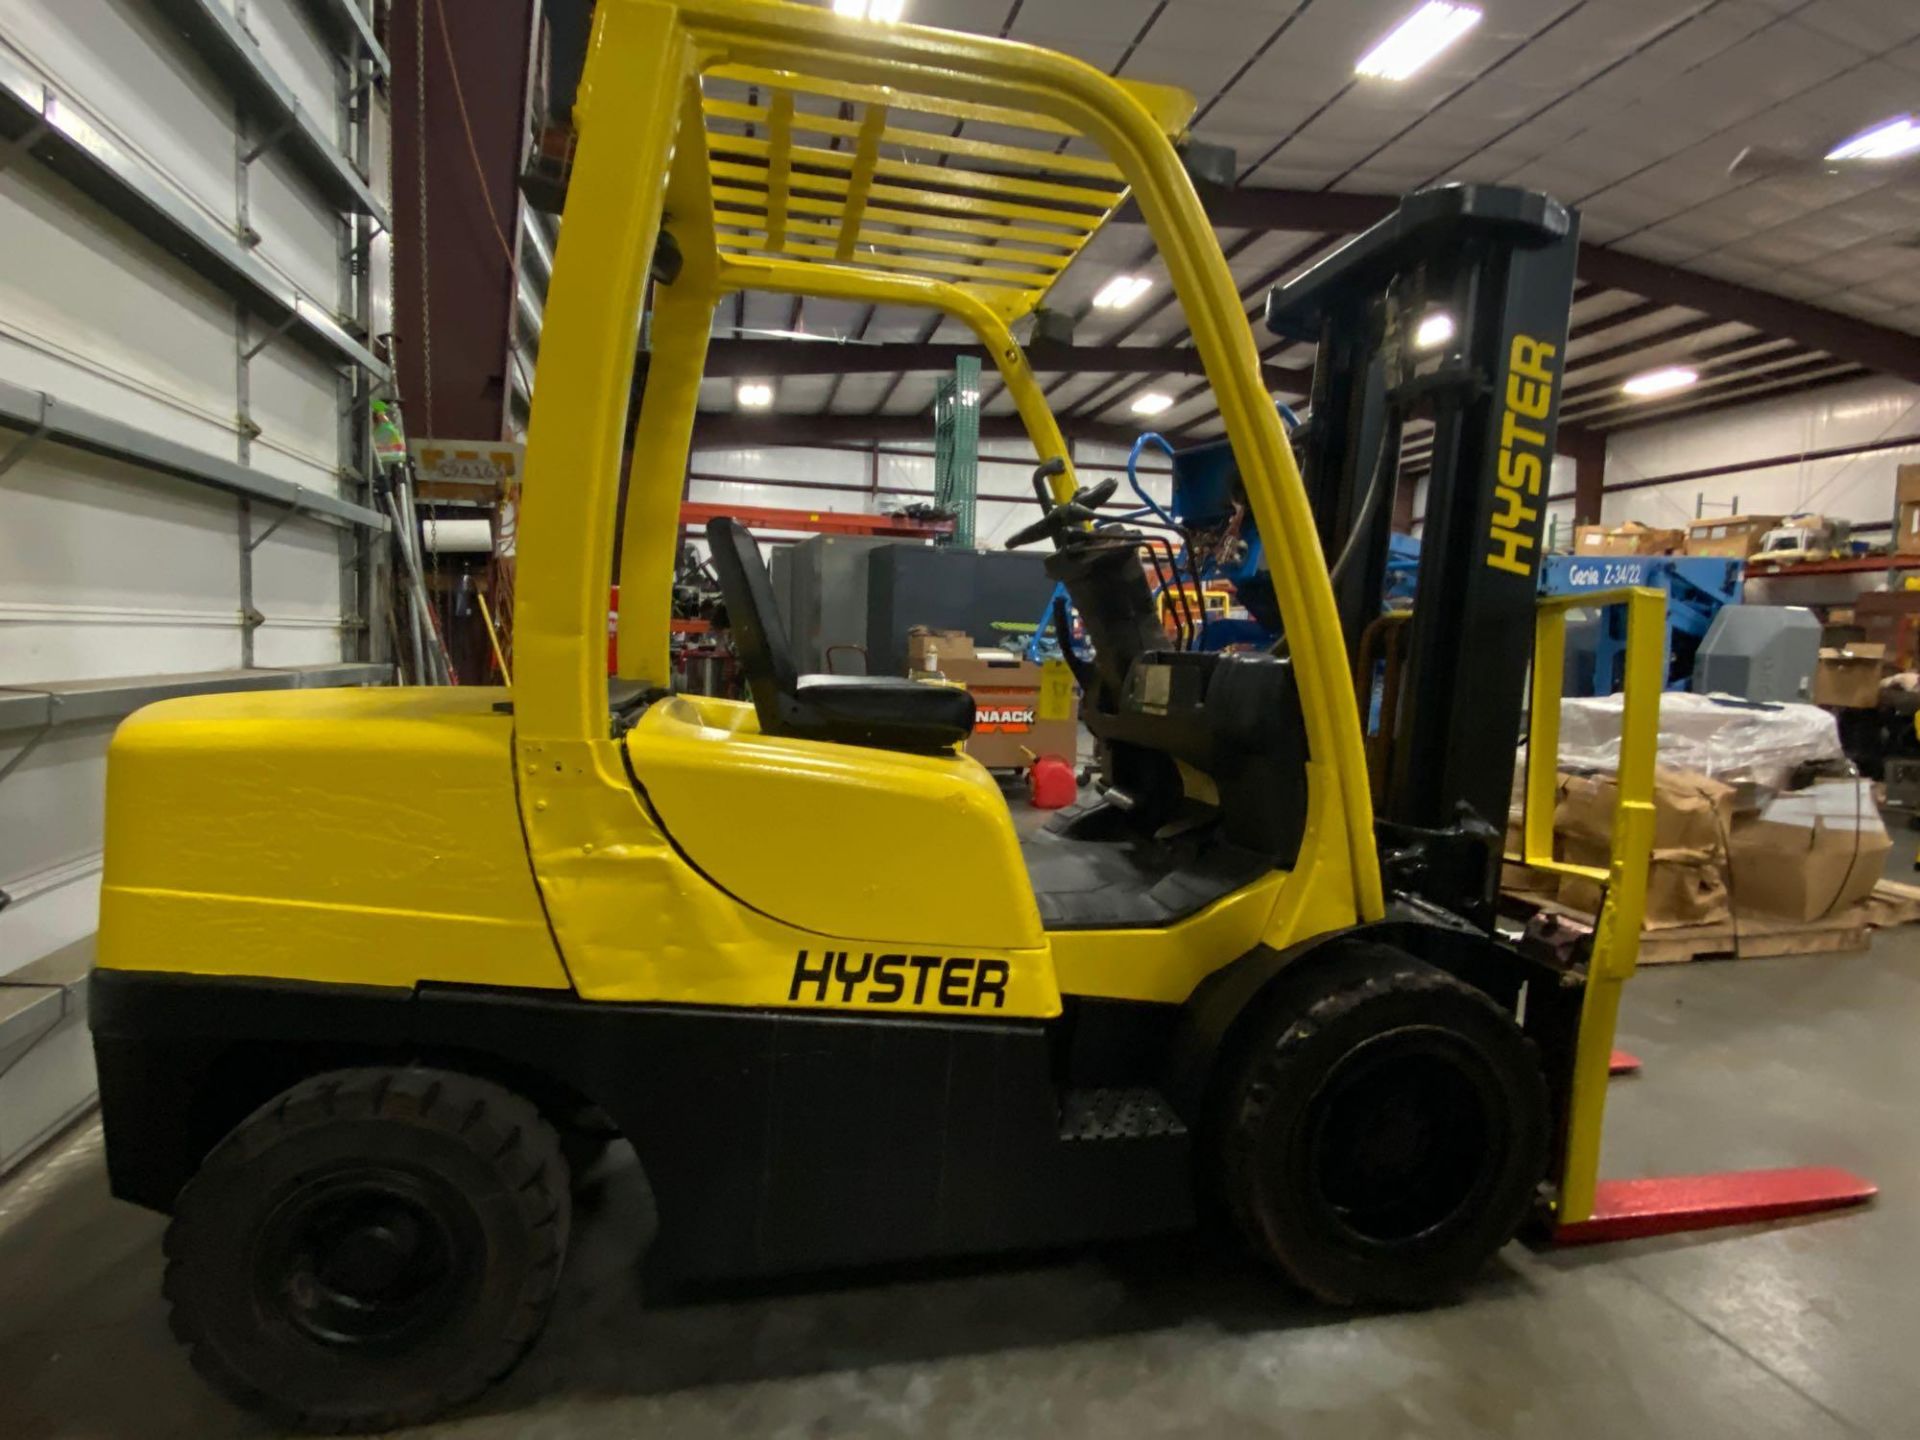 HYSTER H70FT FORKLIFT, APPROX. 7,000 LB CAPACITY, 181.9" HEIGHT CAP, TILT, RUNS AND OPERATES - Image 4 of 10